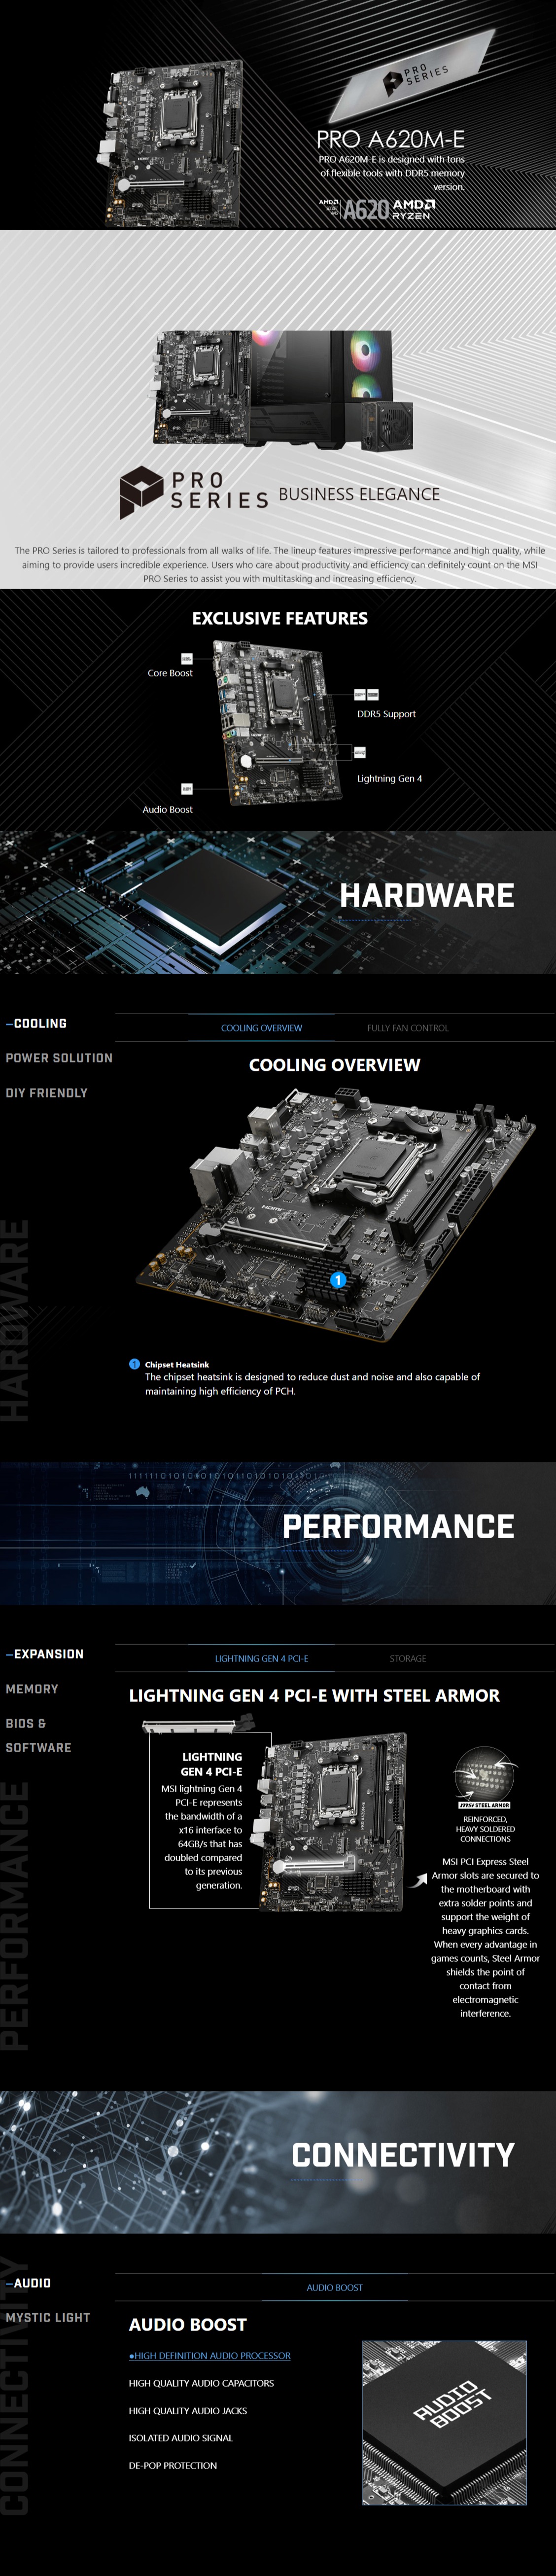 A large marketing image providing additional information about the product MSI PRO A620M-E AM5 mATX Desktop Motherboard - Additional alt info not provided